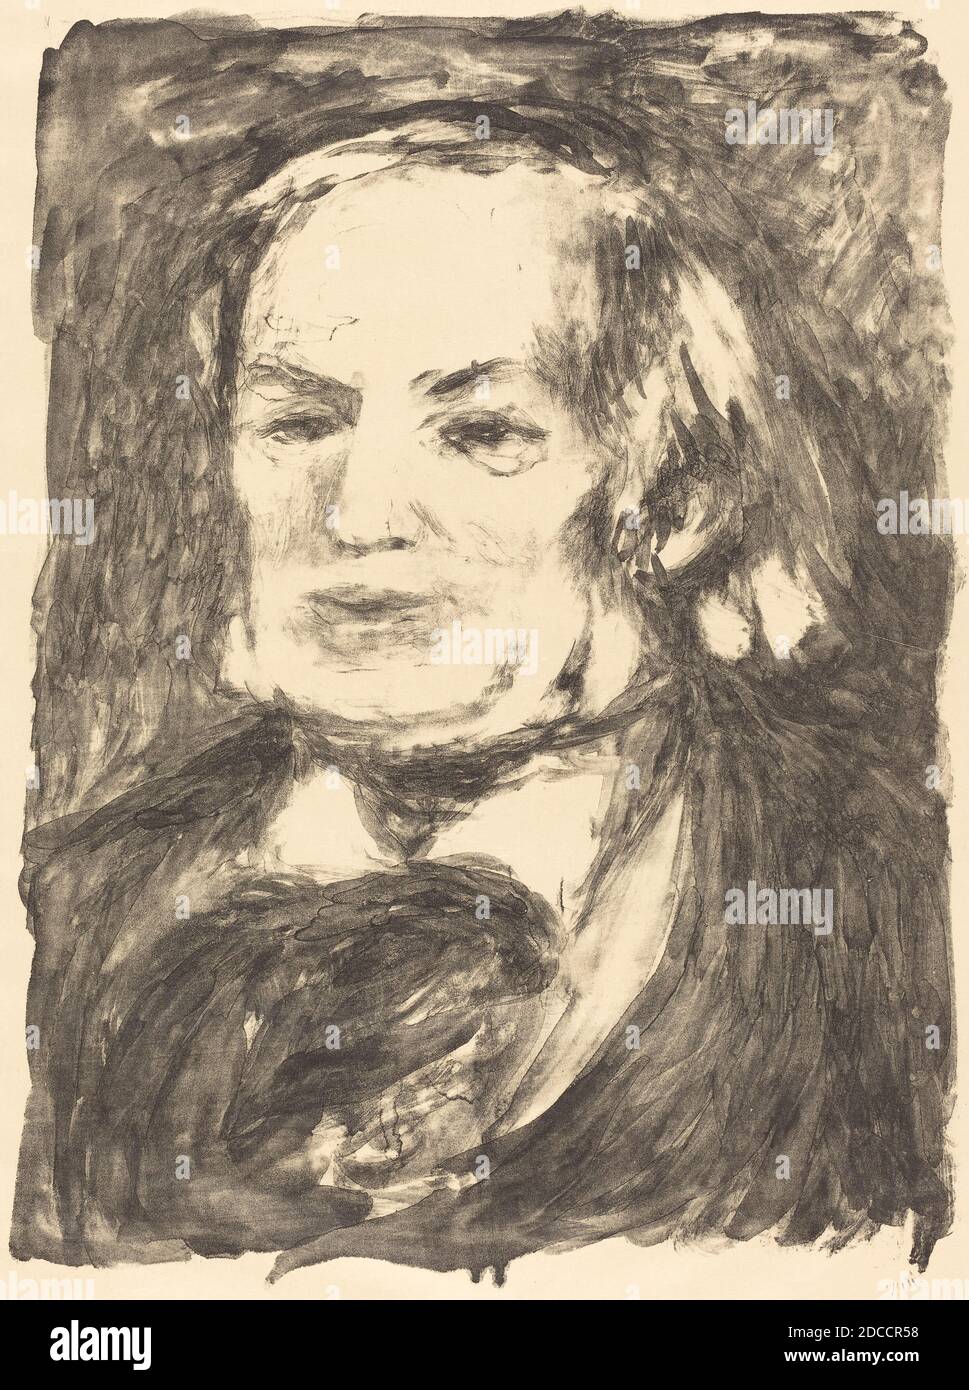 Auguste Renoir, (artist), French, 1841 - 1919, Richard Wagner, c. 1900, lithograph on japan paper Stock Photo